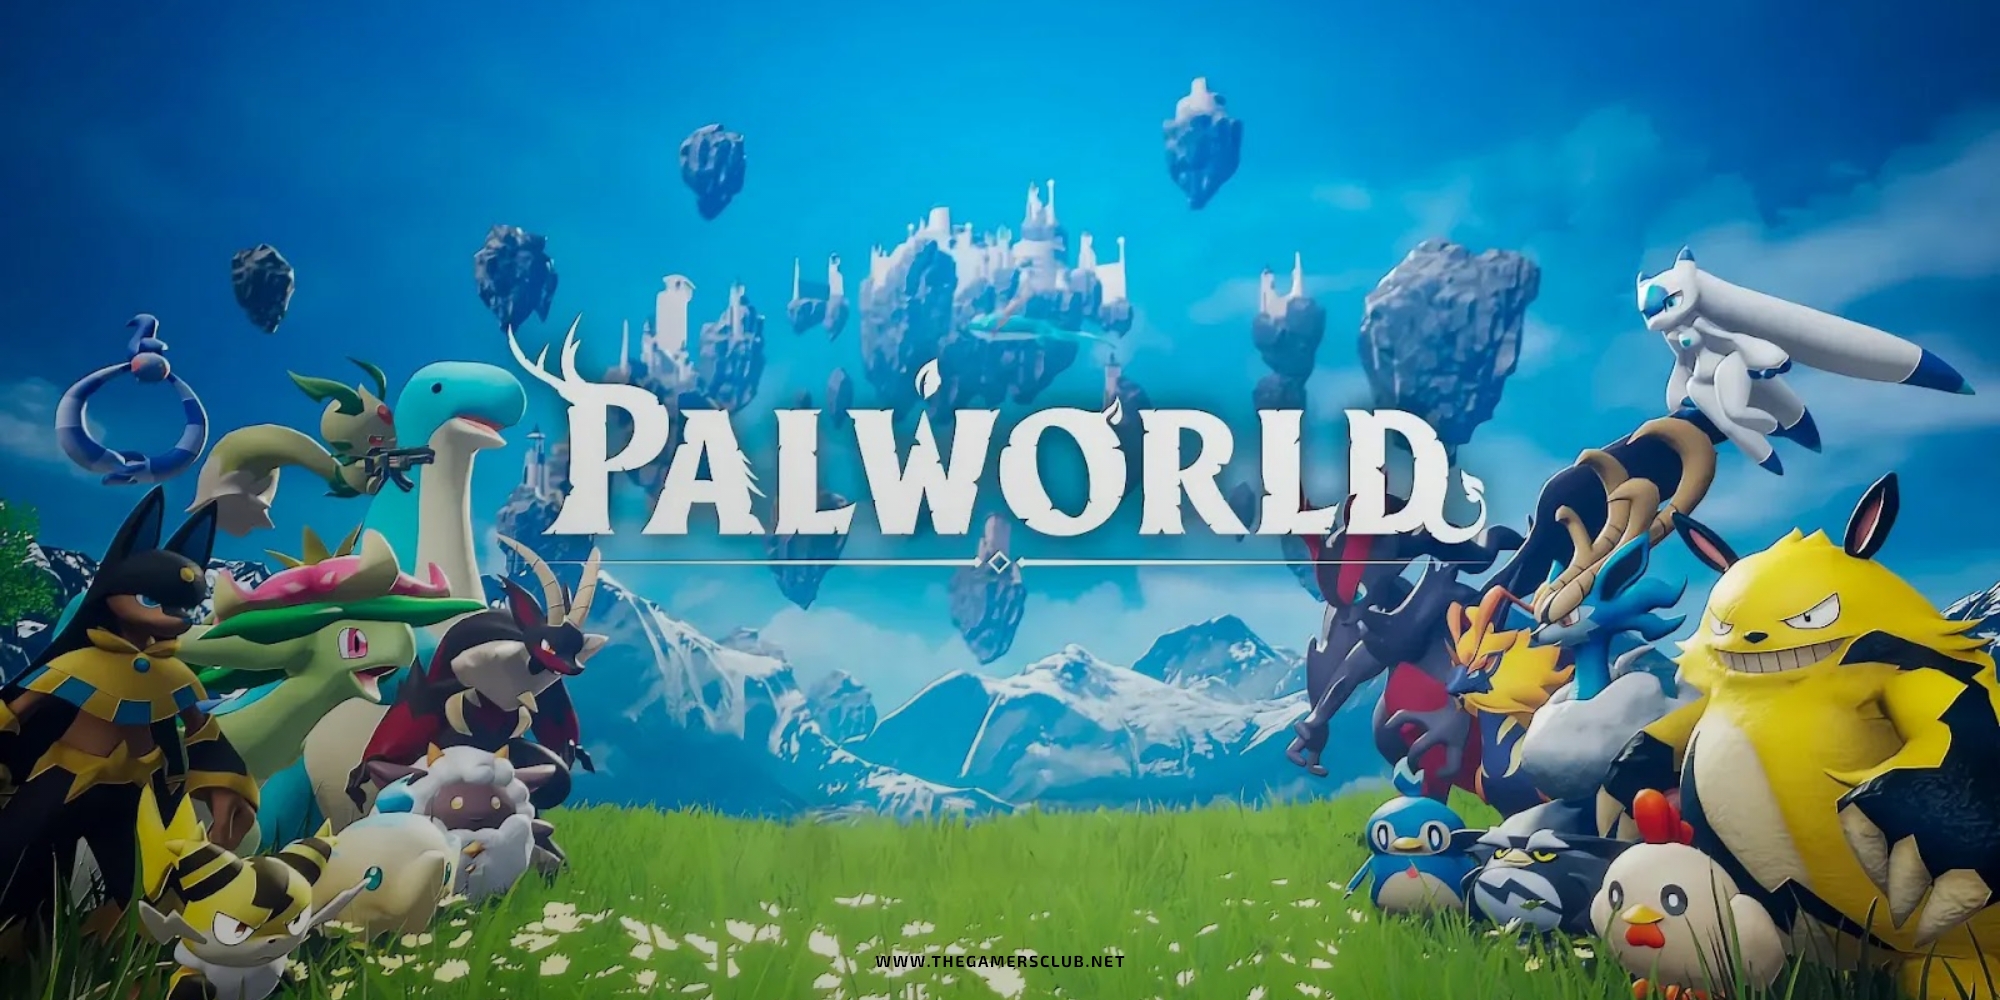 Palworld Survival Guide - The Gamers Club